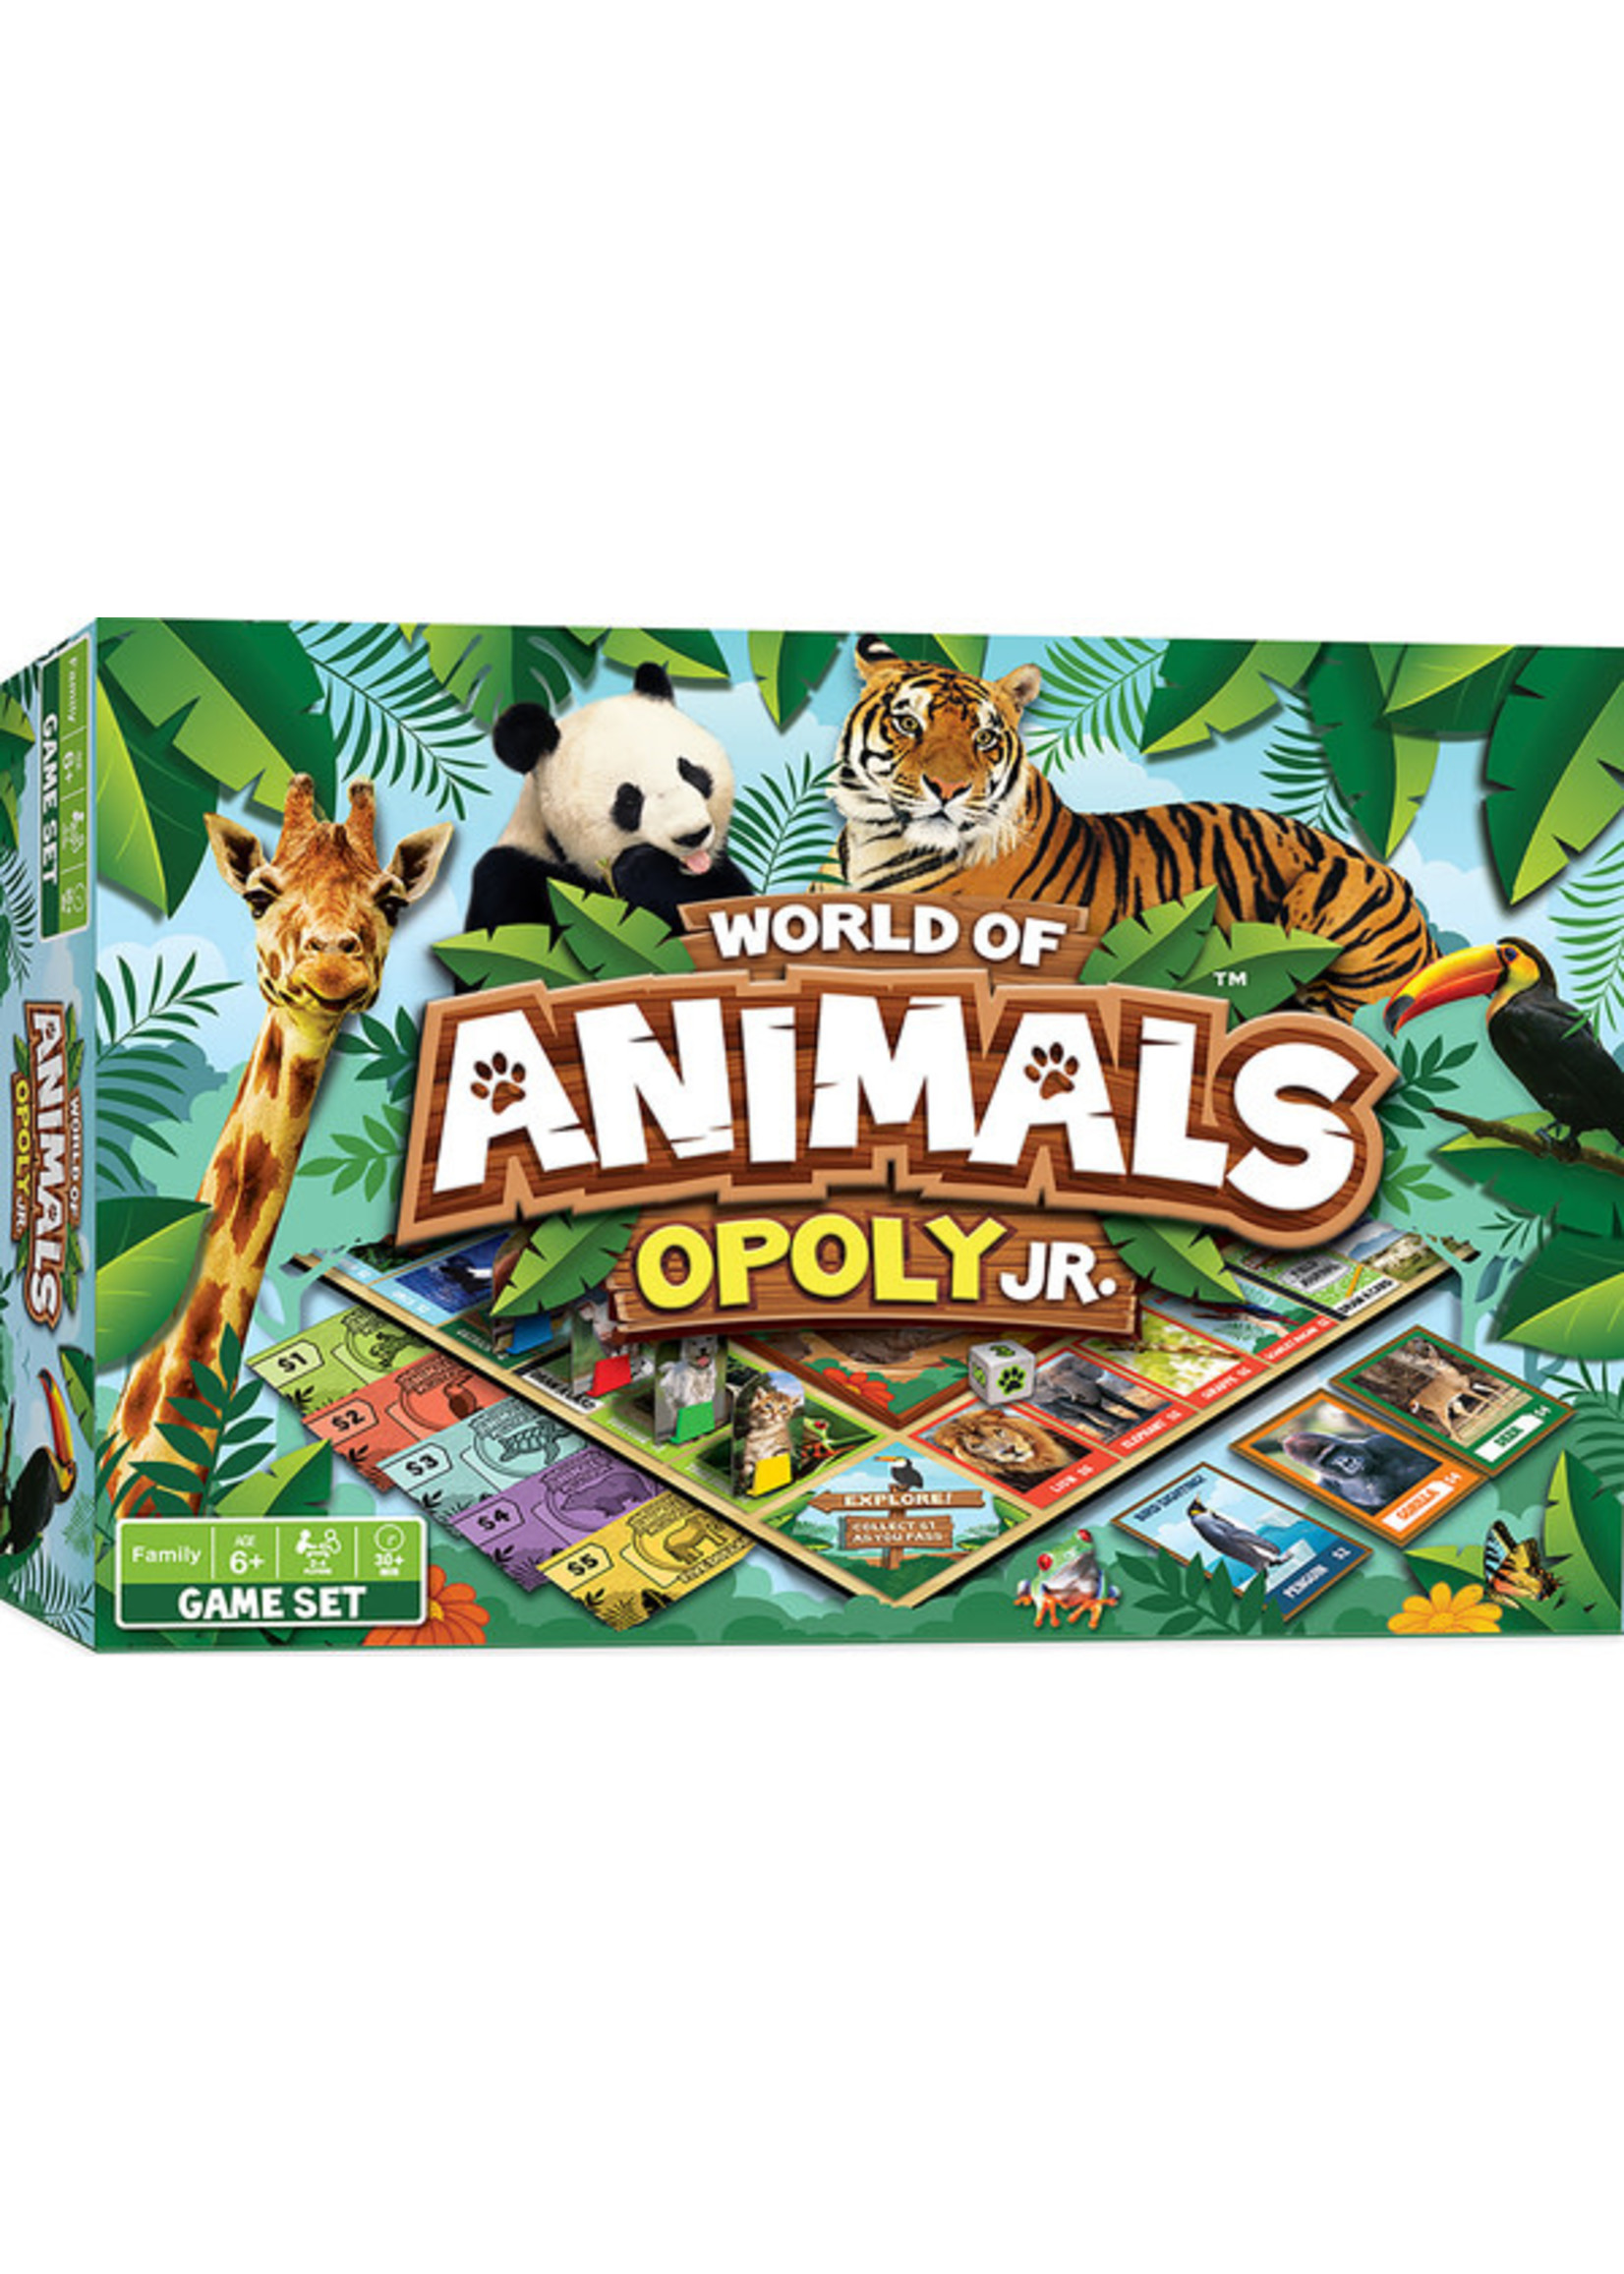 World of Animals Opoly Jr